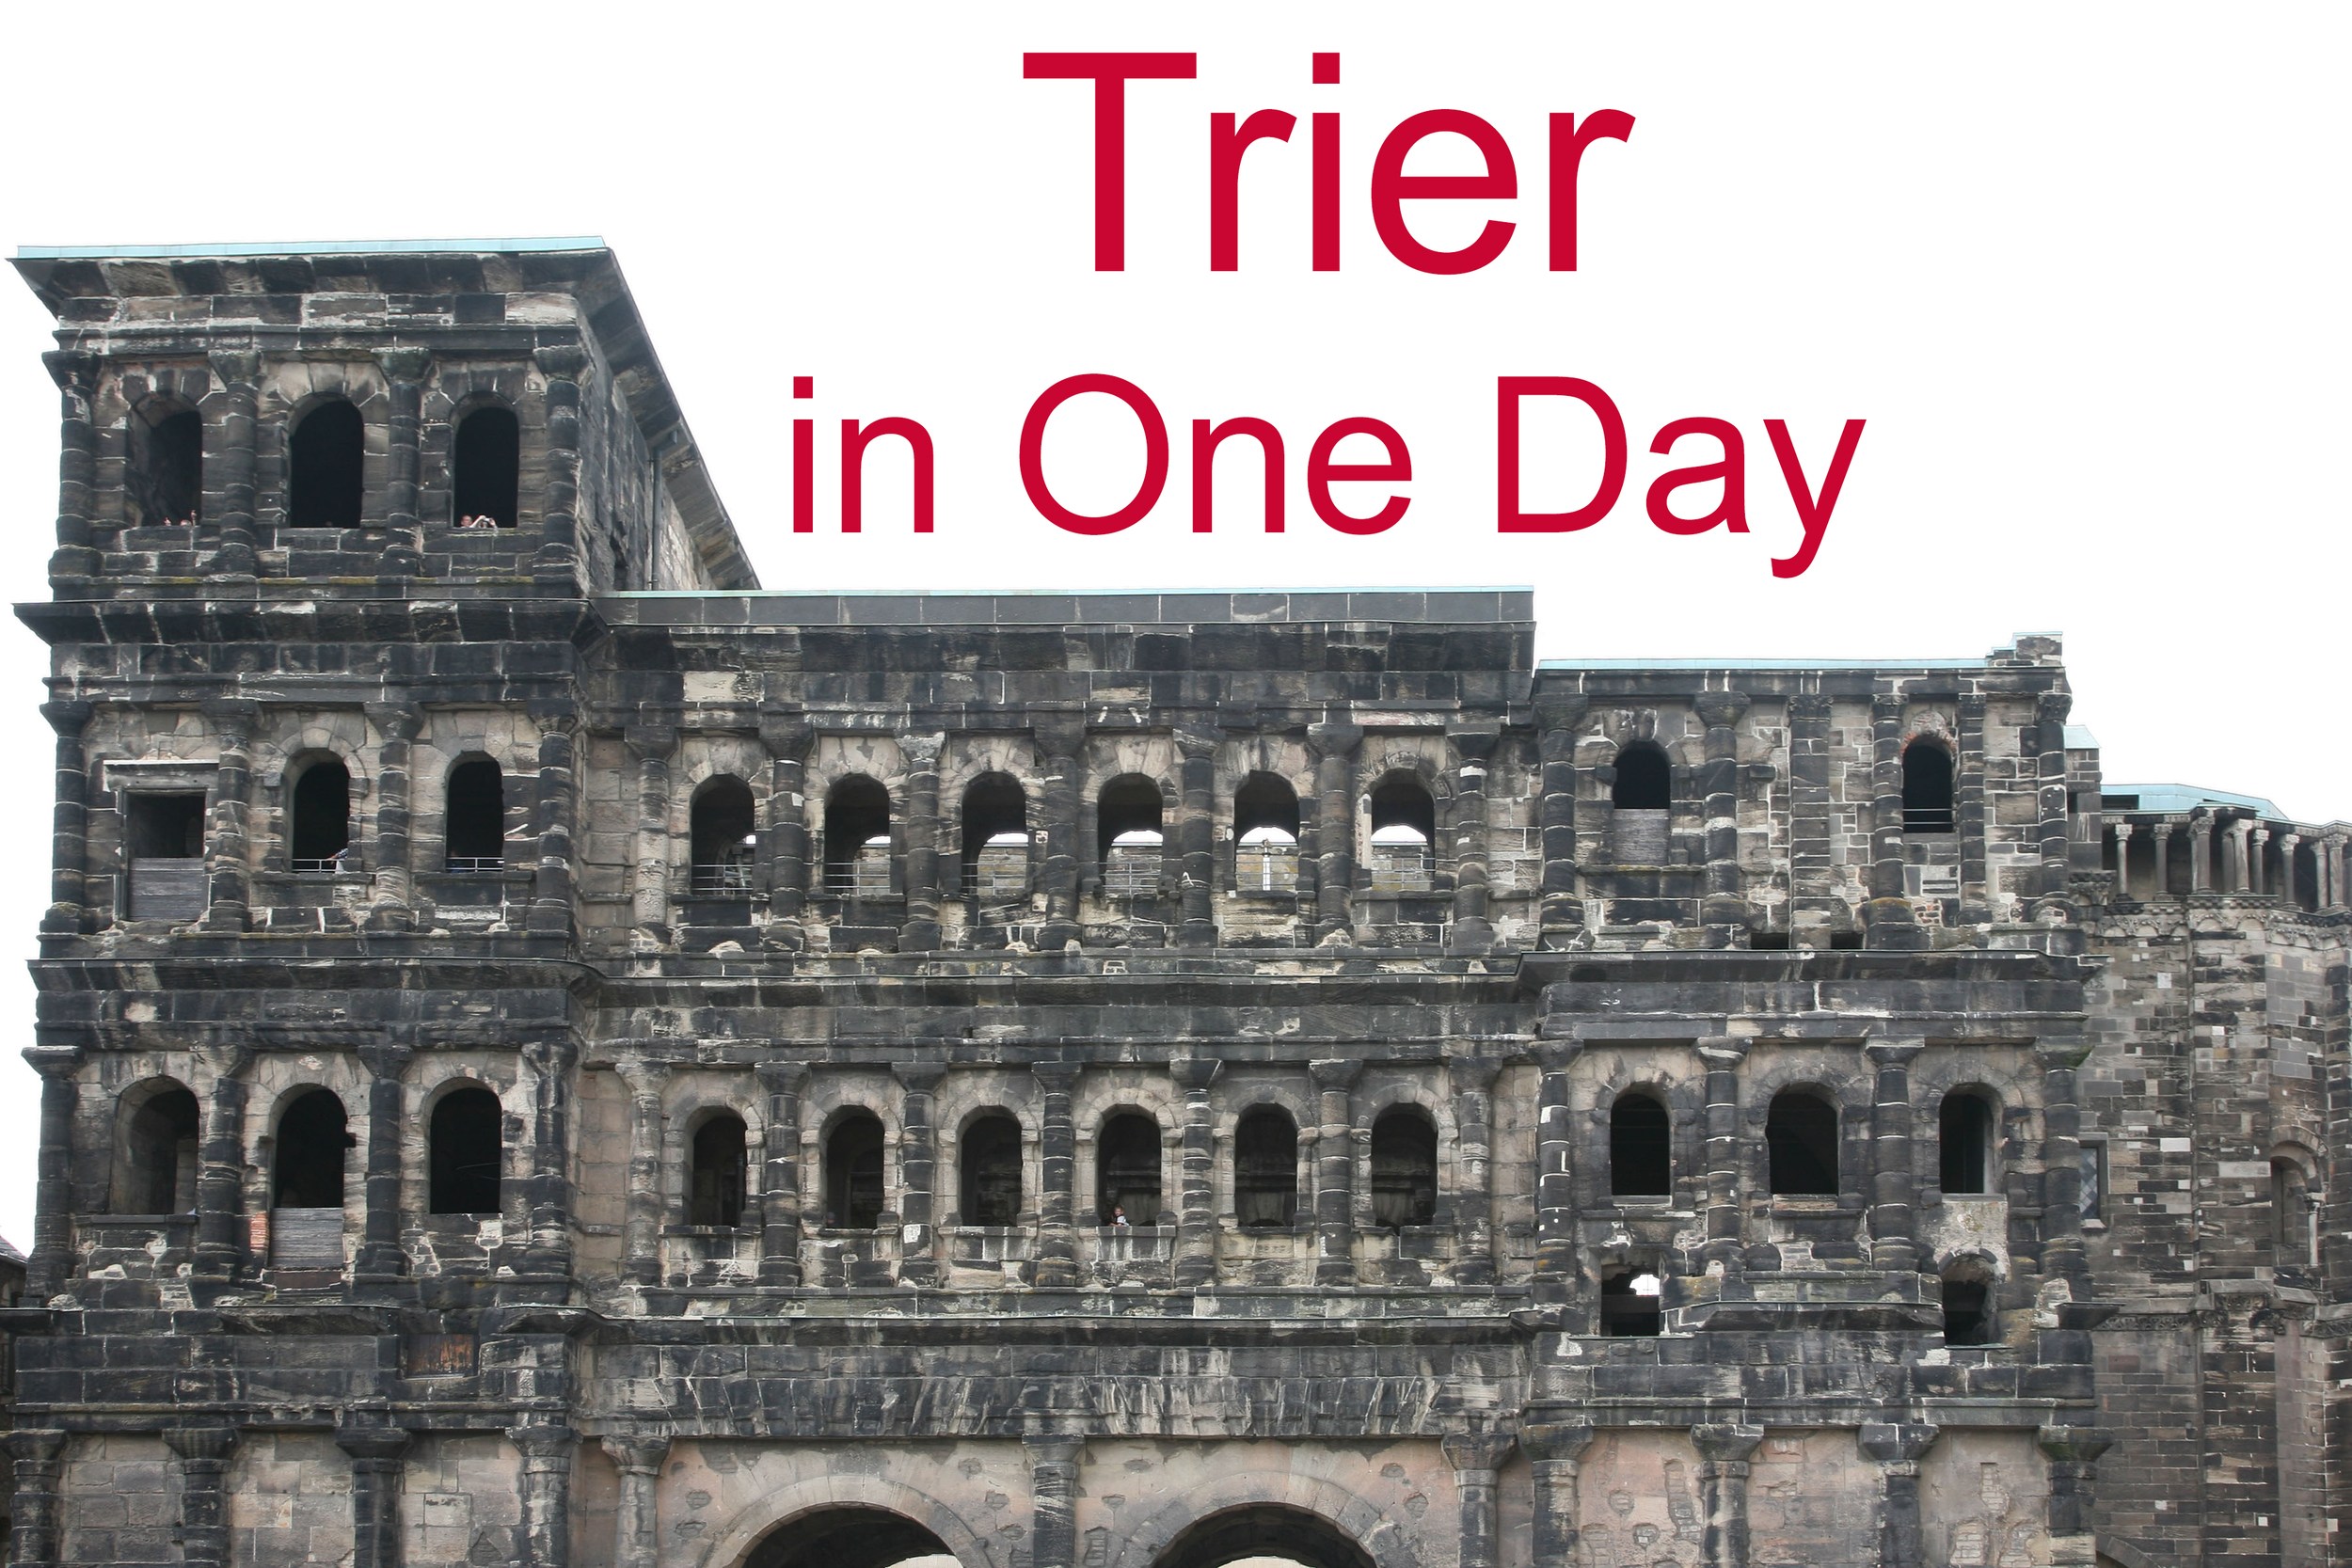 A Visit to the Oldest City in Germany, Trier in One Day.